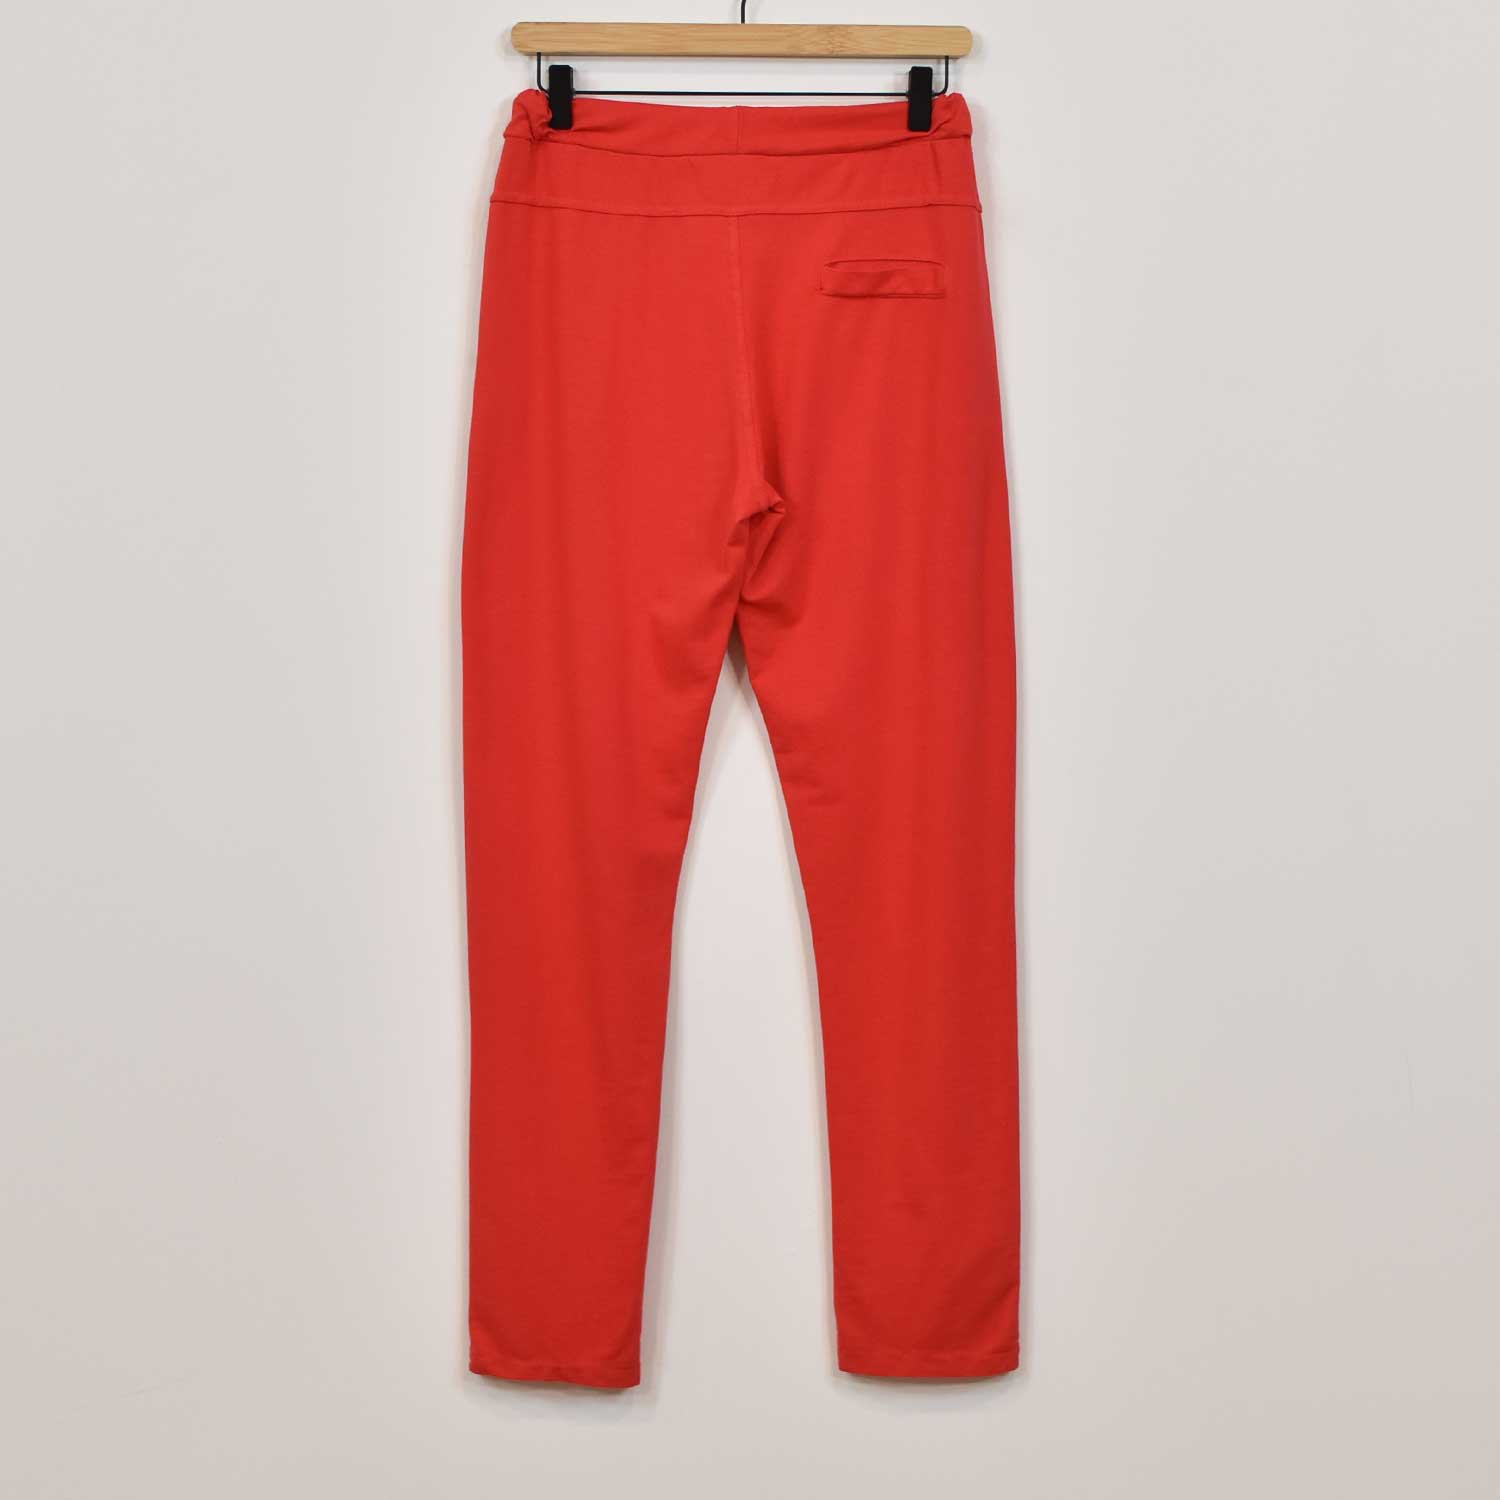 Red jogger pants